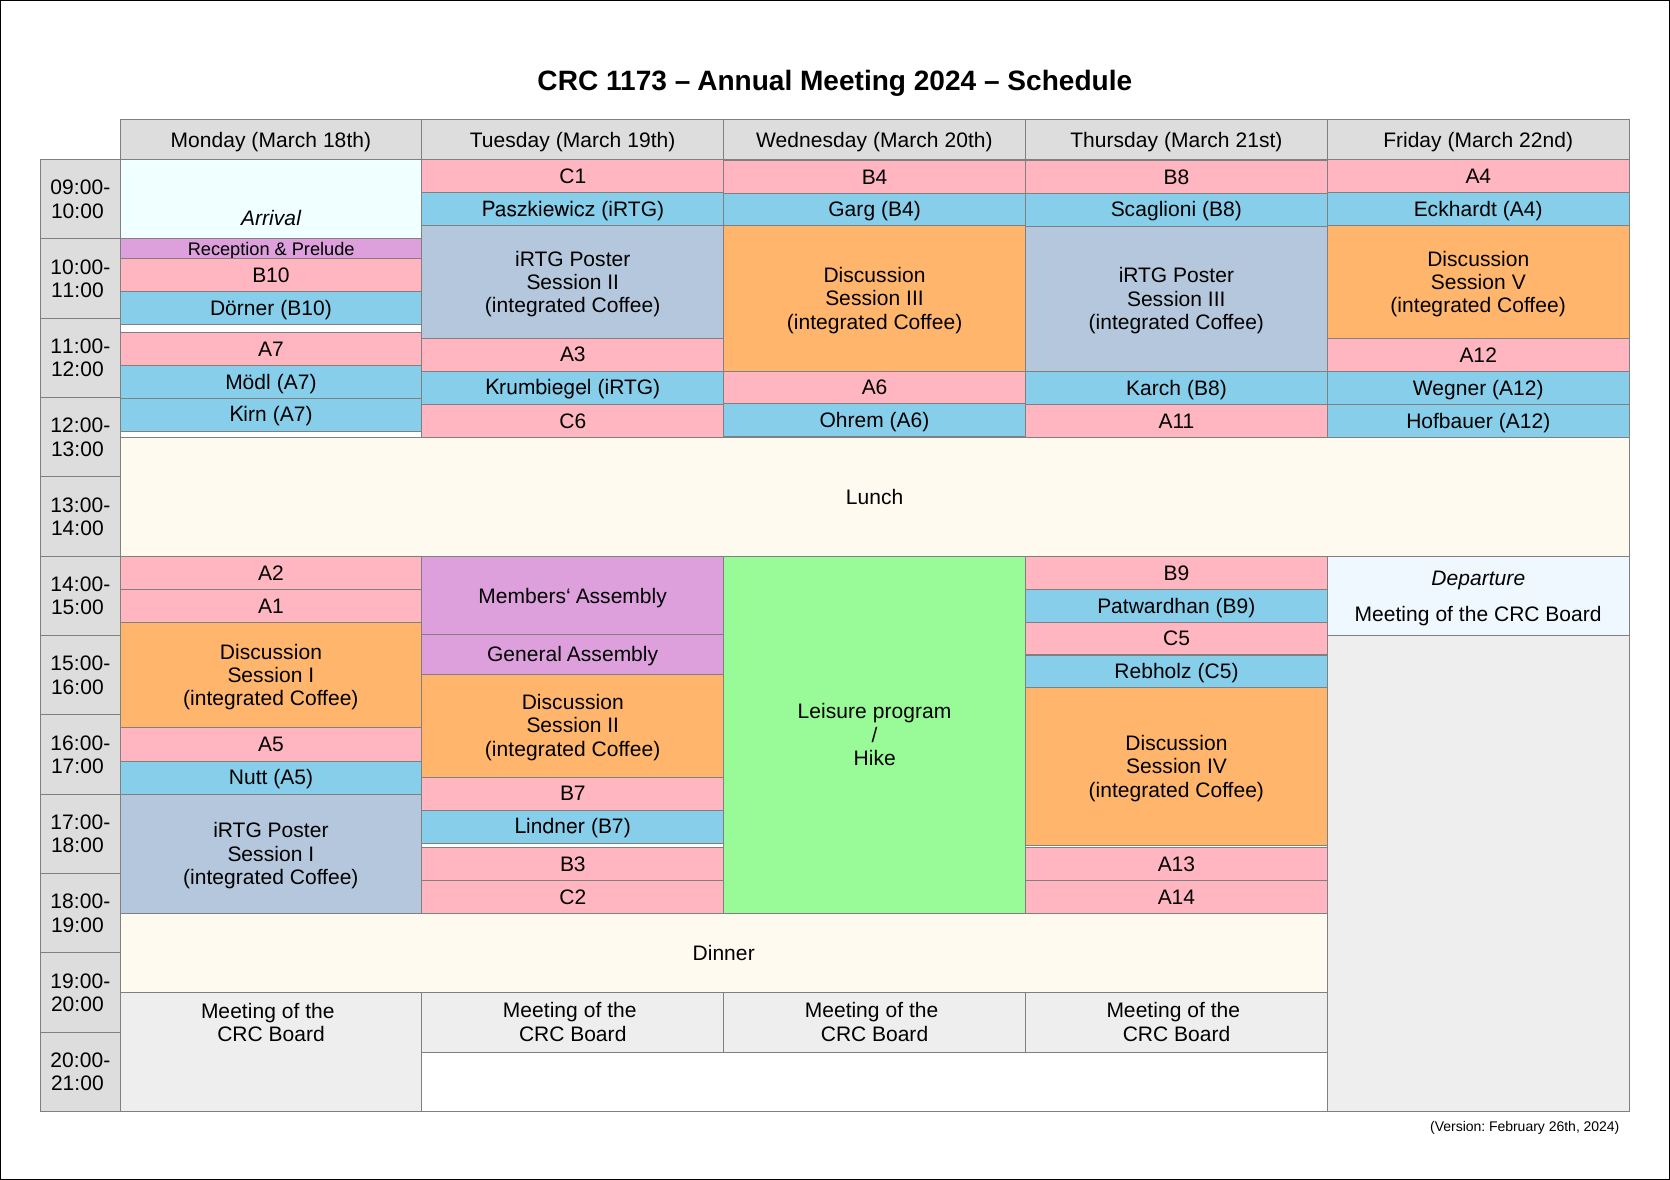 Schedule of the annual meeting in 2024